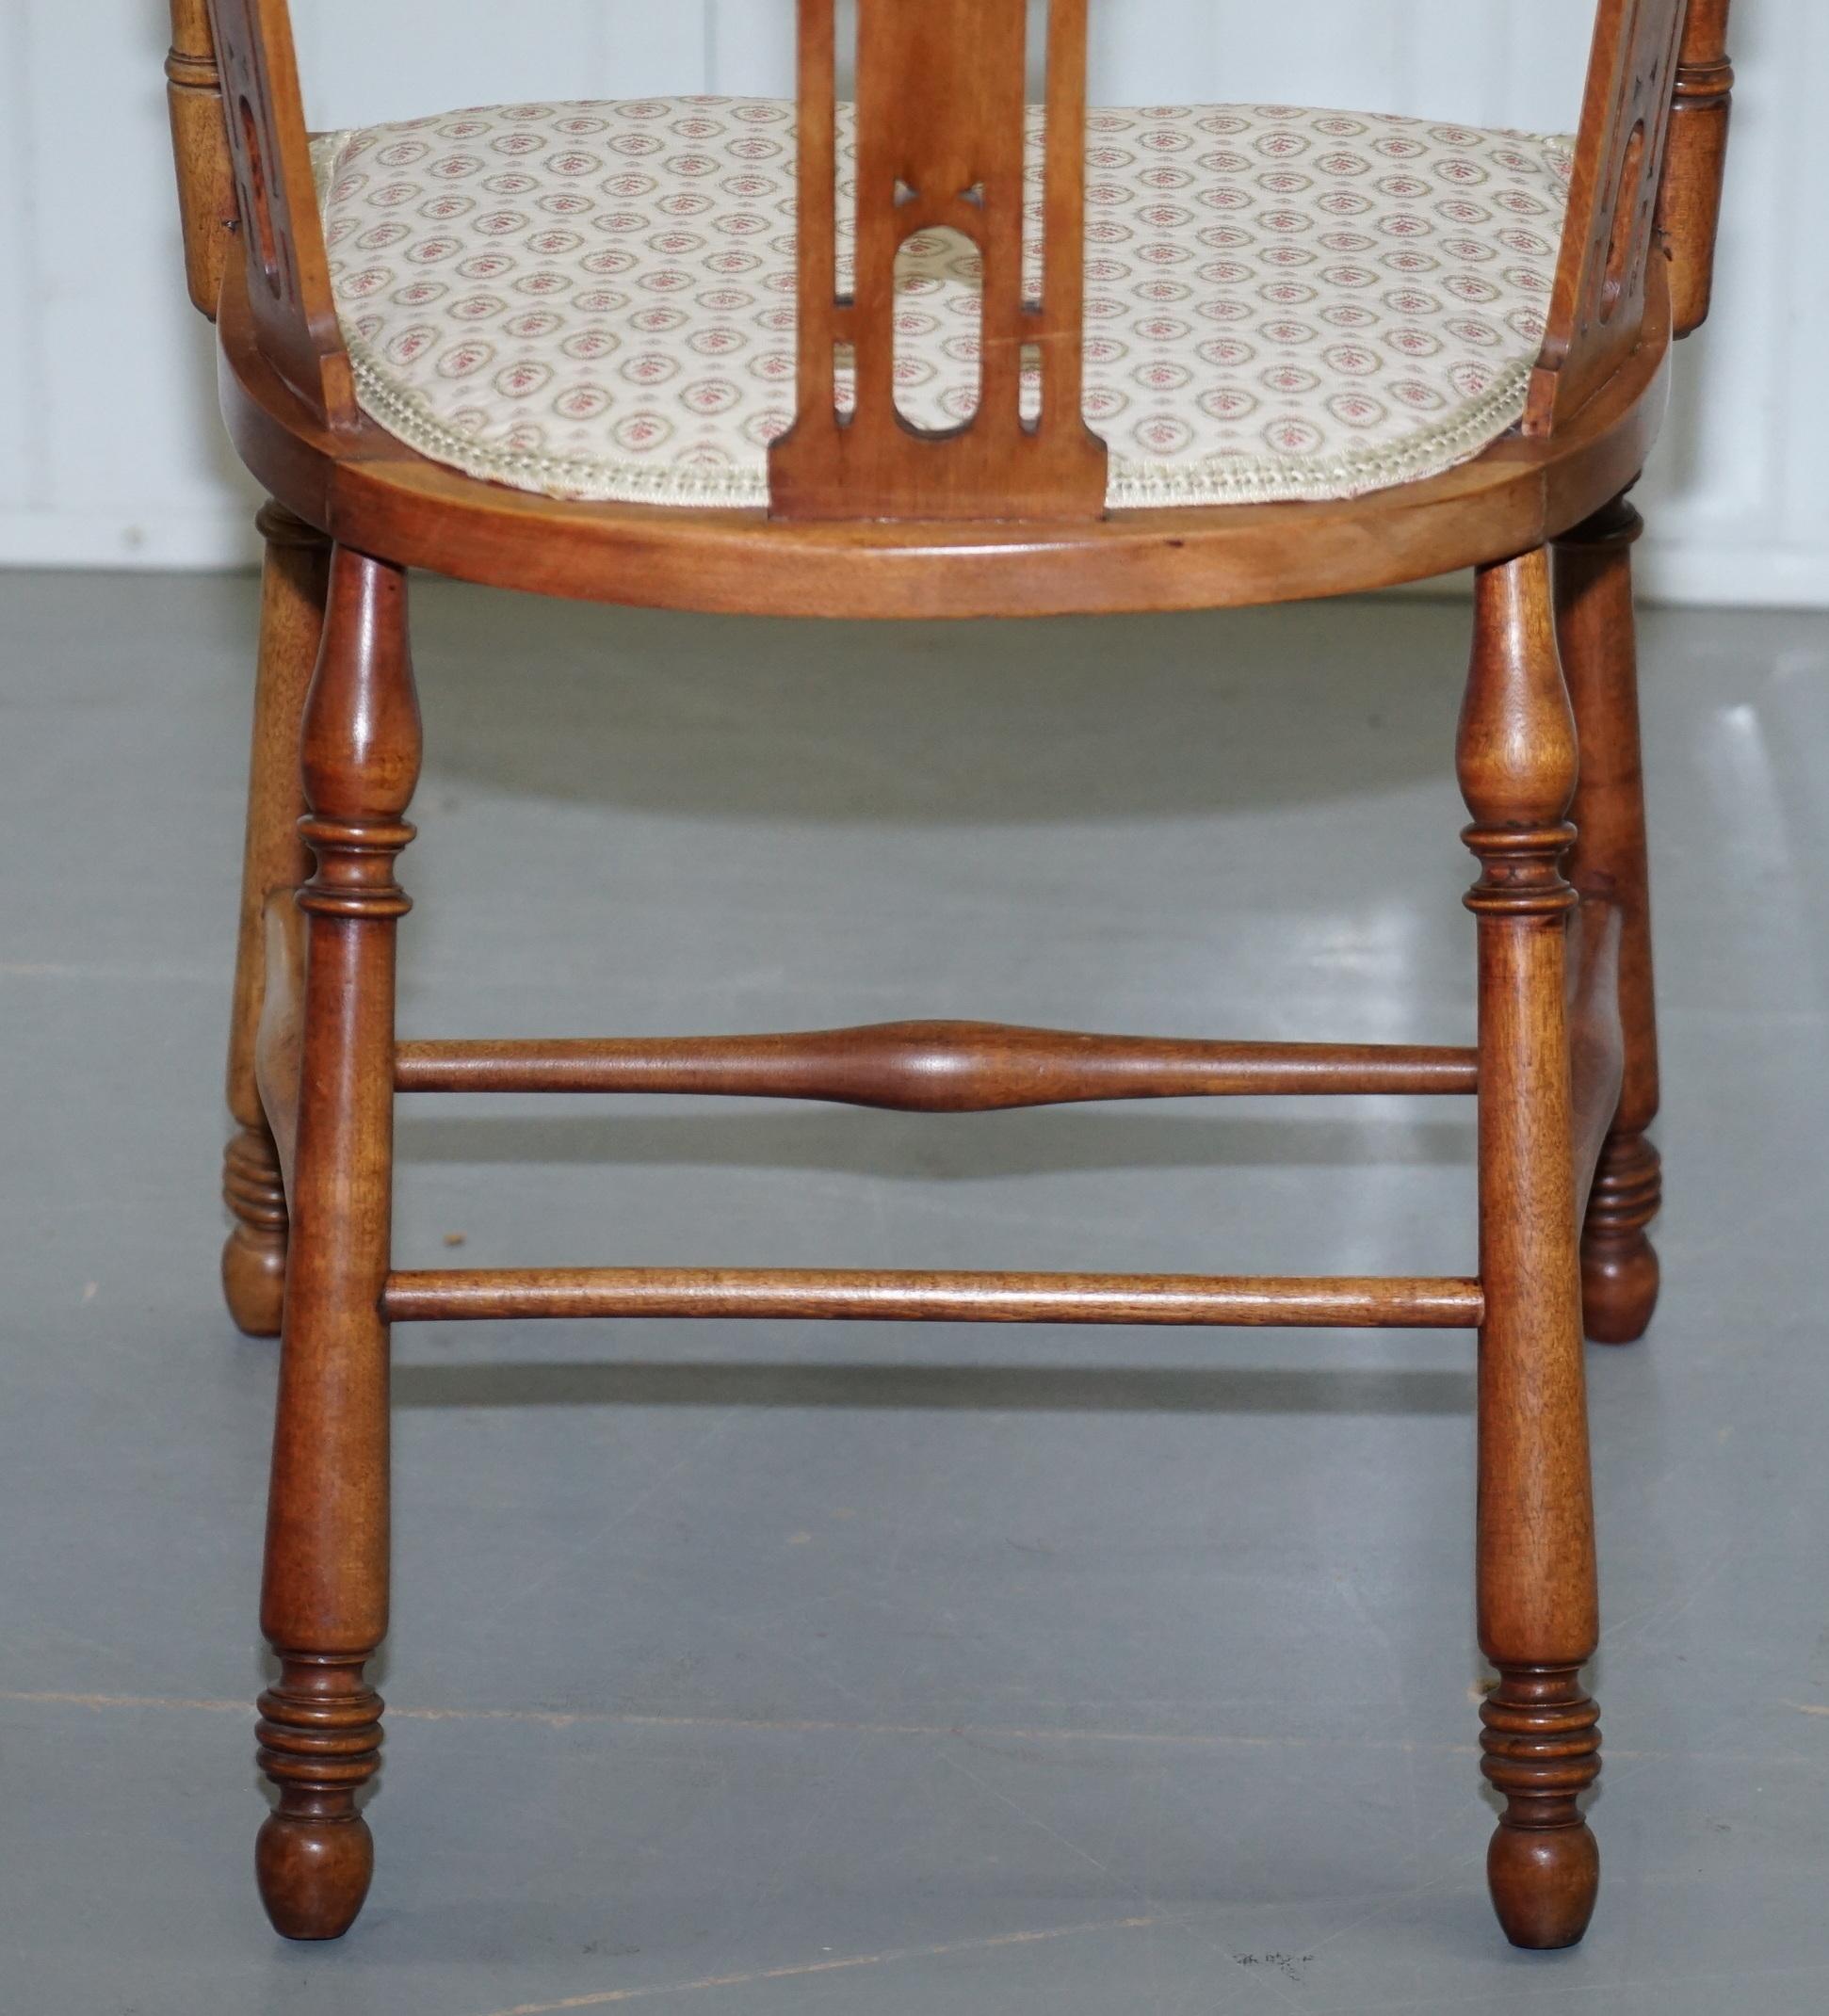 Stunning Edwardian Bow Back Walnut Chair Arts & Crafts Mother of Pearl Inlay For Sale 9